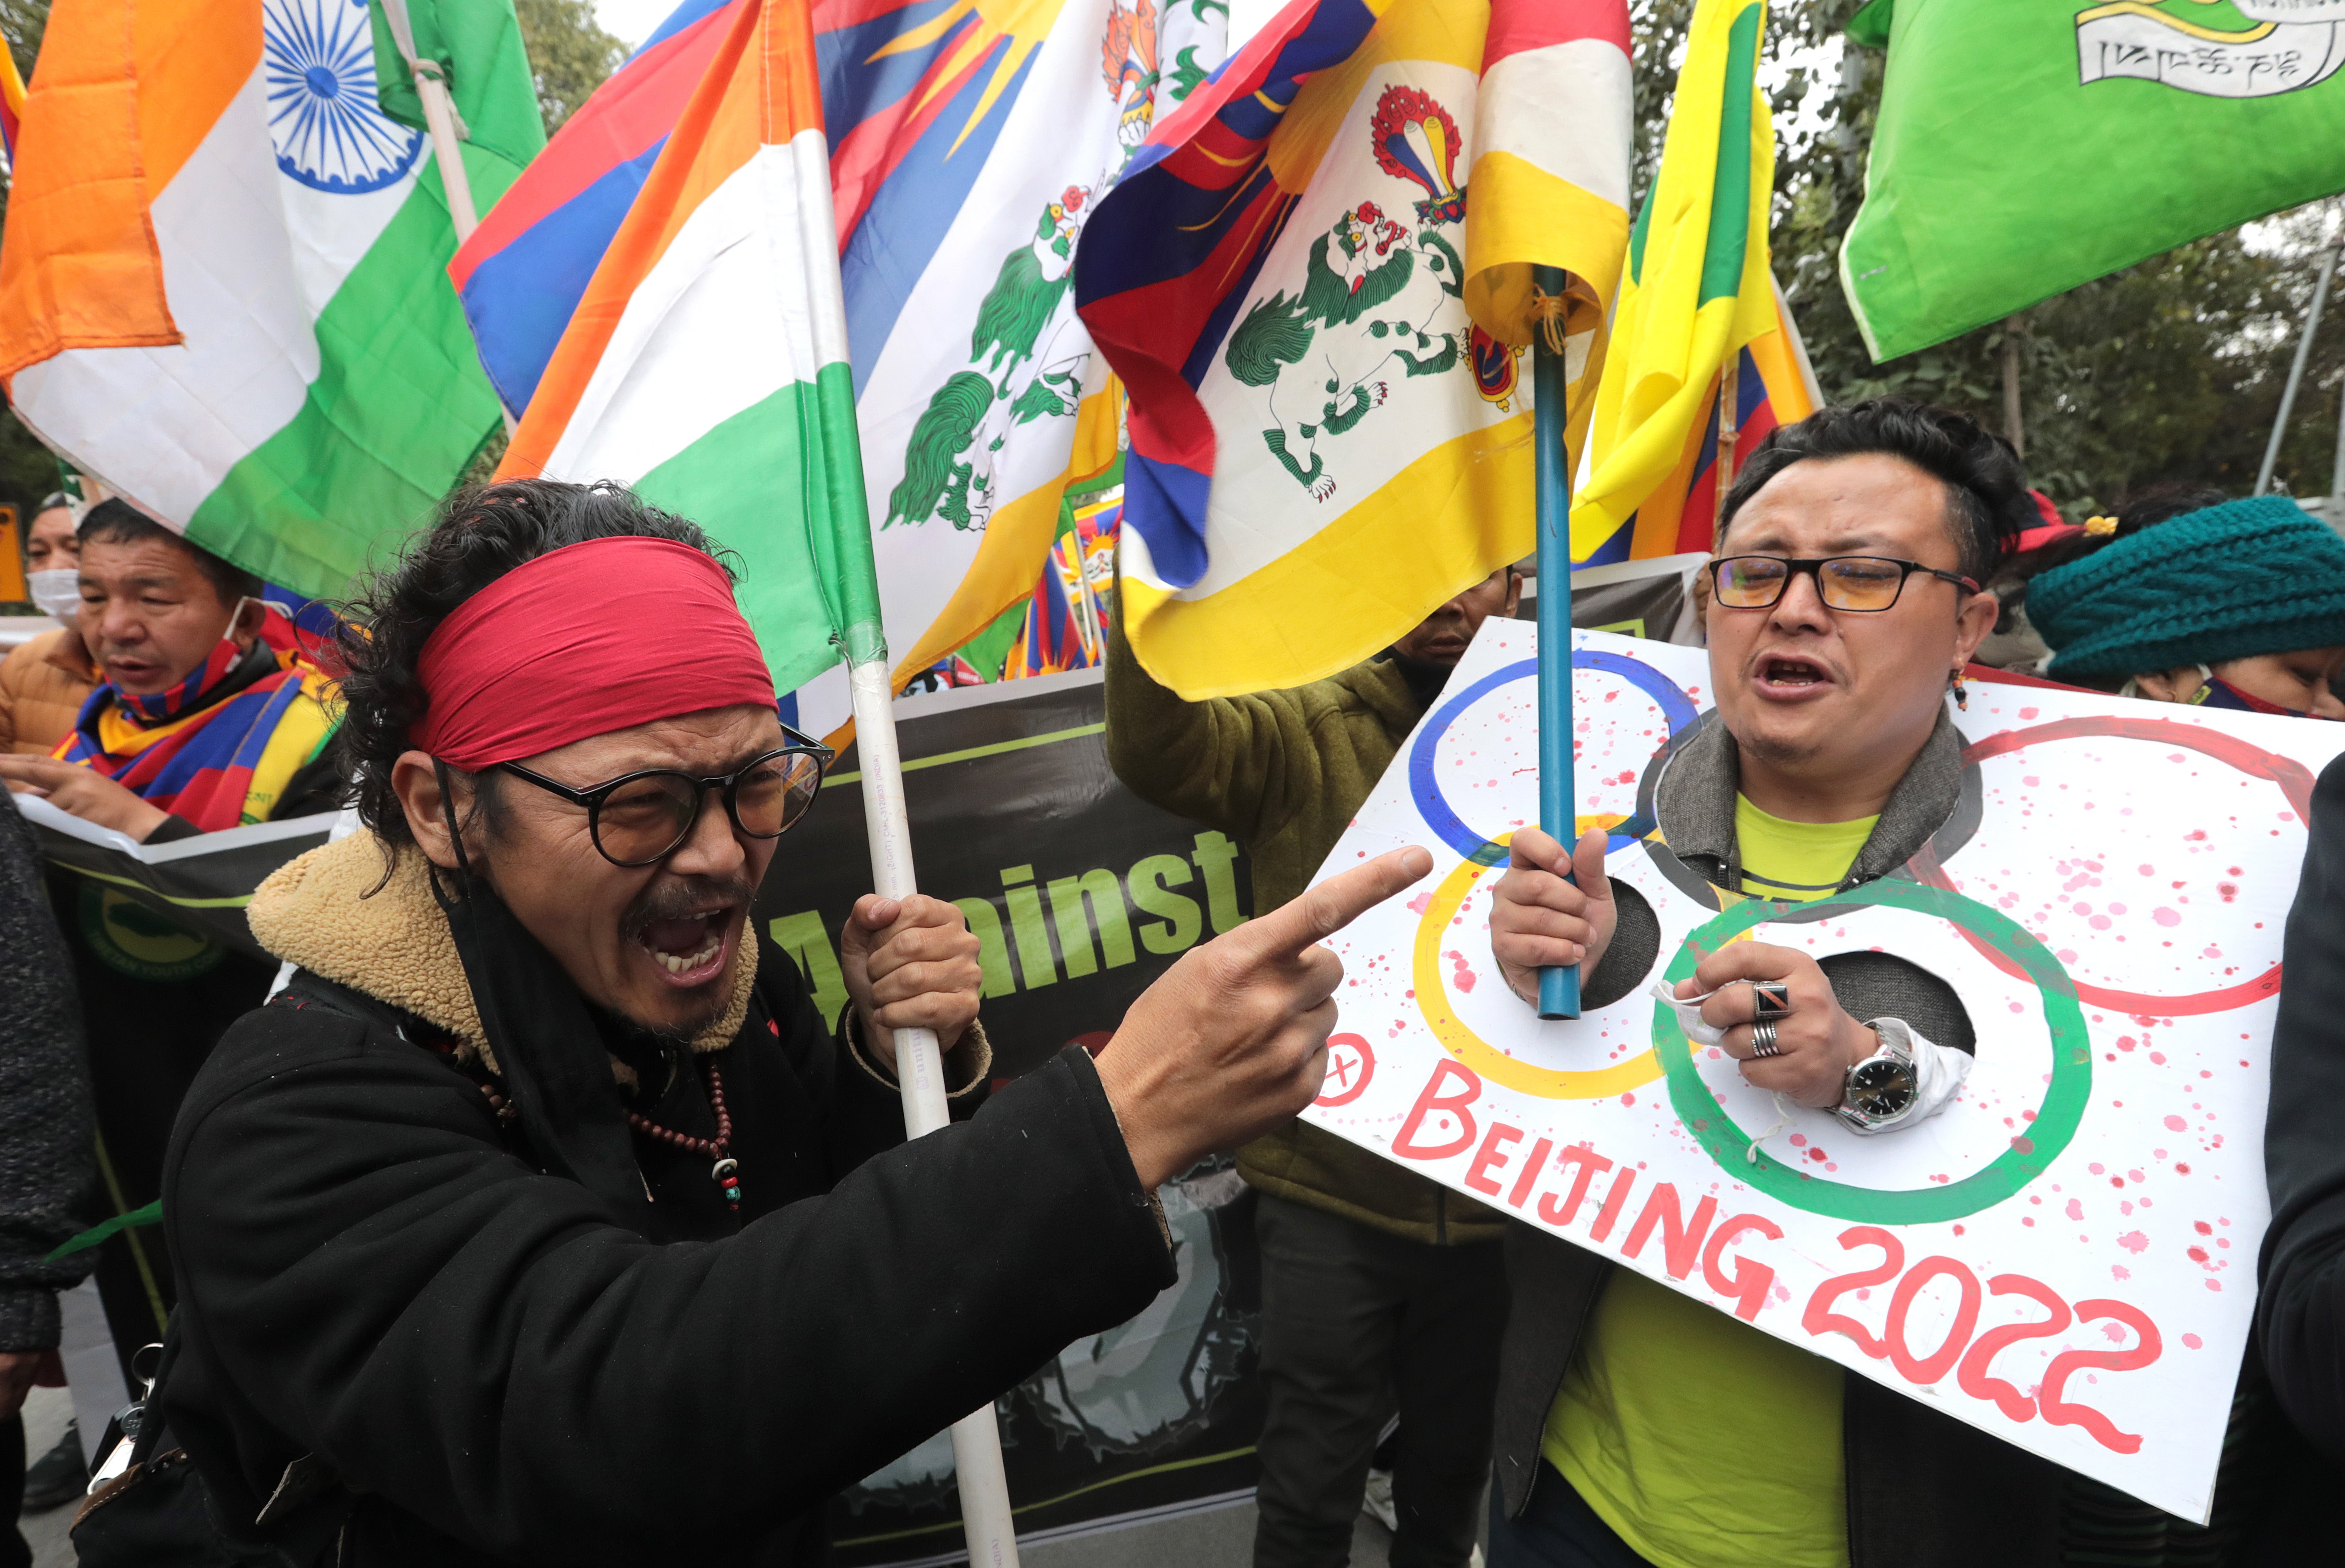 Tibetans living in exile in India take part in a protest march in Delhi against the 2022 Beijing Winter Olympics